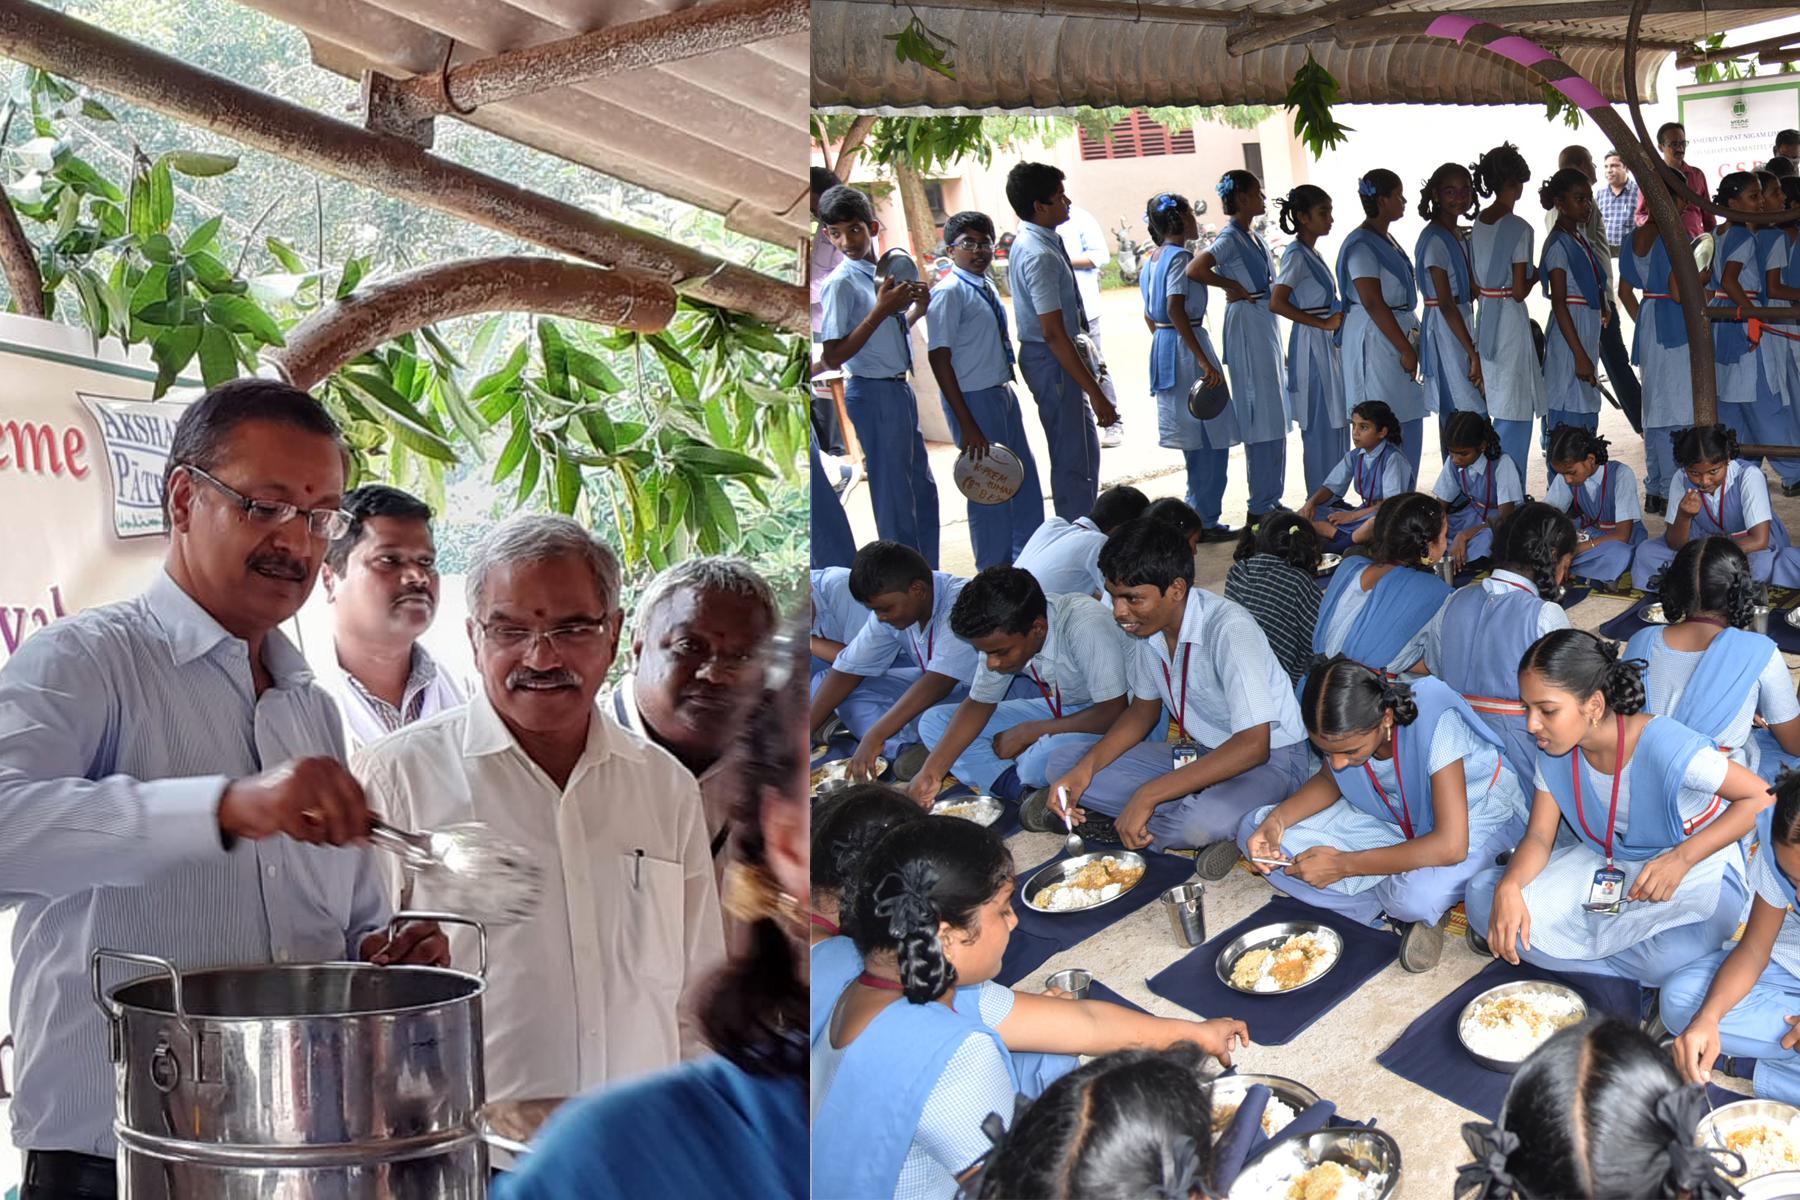 RINL Launches Mid-day meal to poor and needy children under CSR initiative